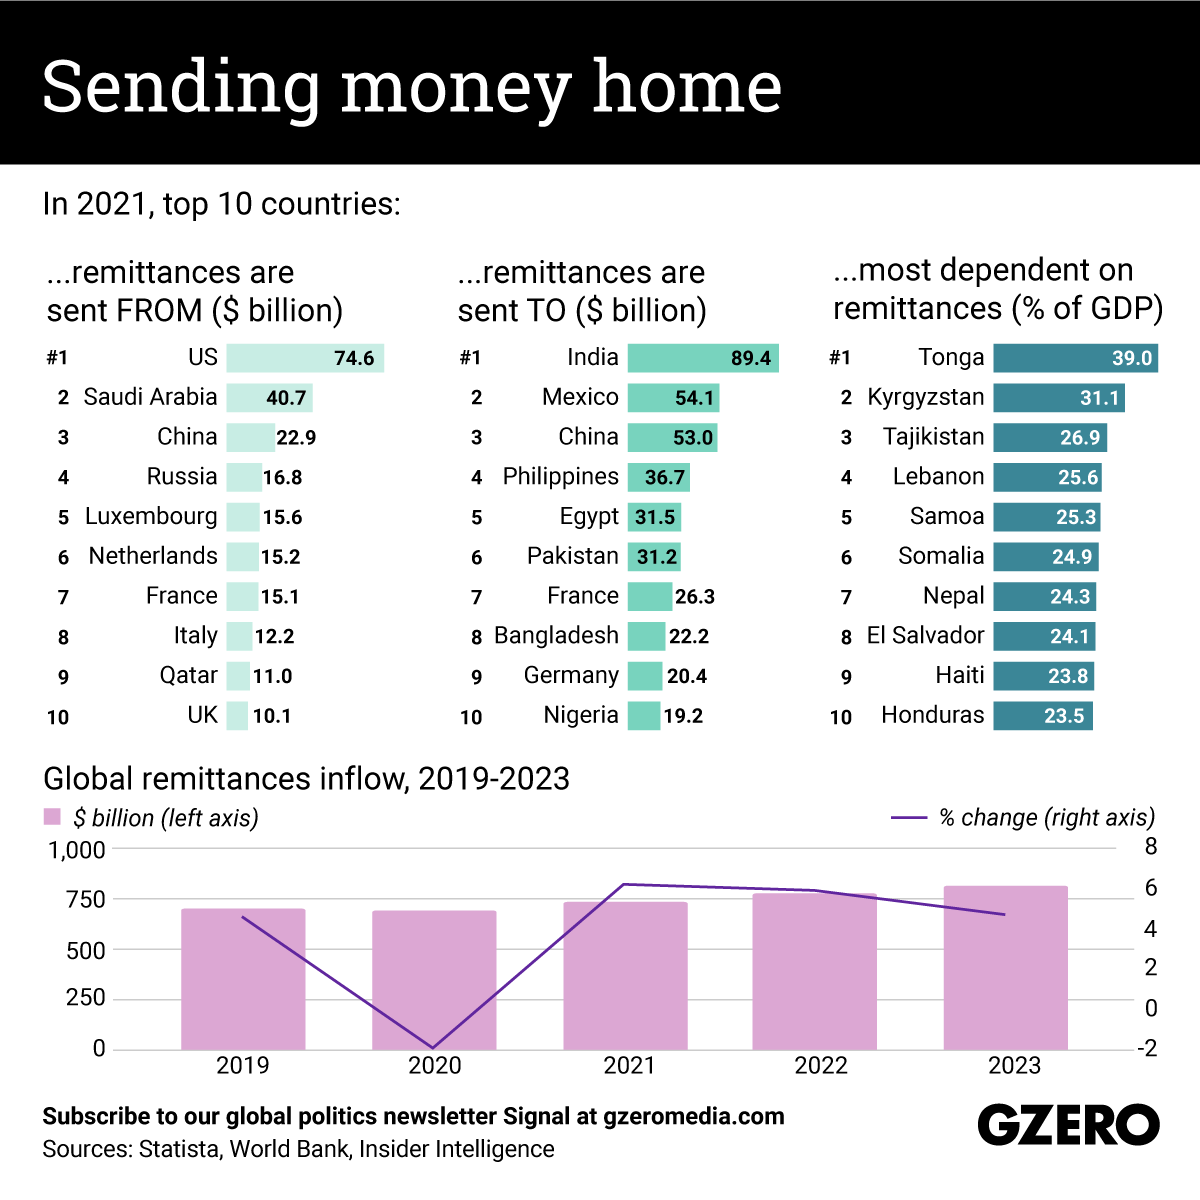 Top 10 countries remittances are sent from, and sent to; the 10 countries most dependent on remittances; and how many billions are flowing in remittances each year since 2013.